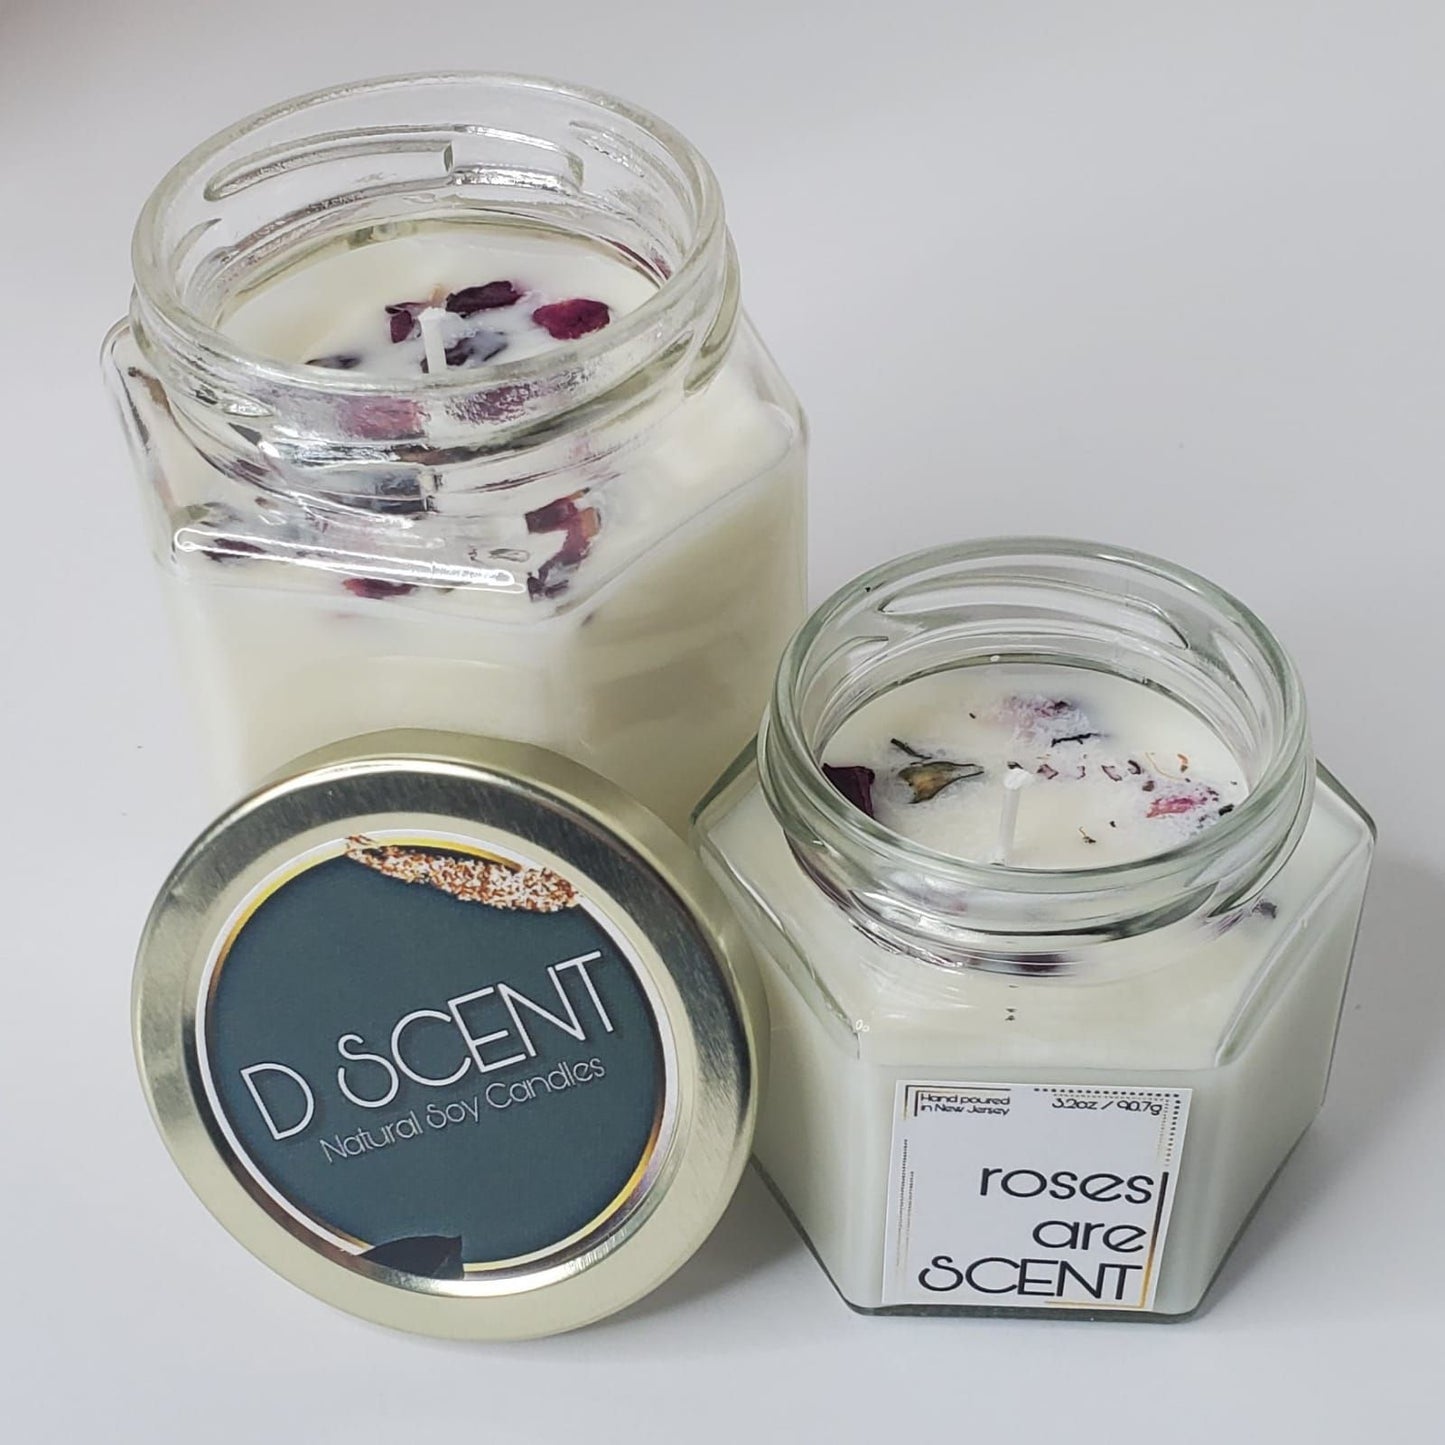 roses are SCENT Aromatherapy Collection - D SCENT 